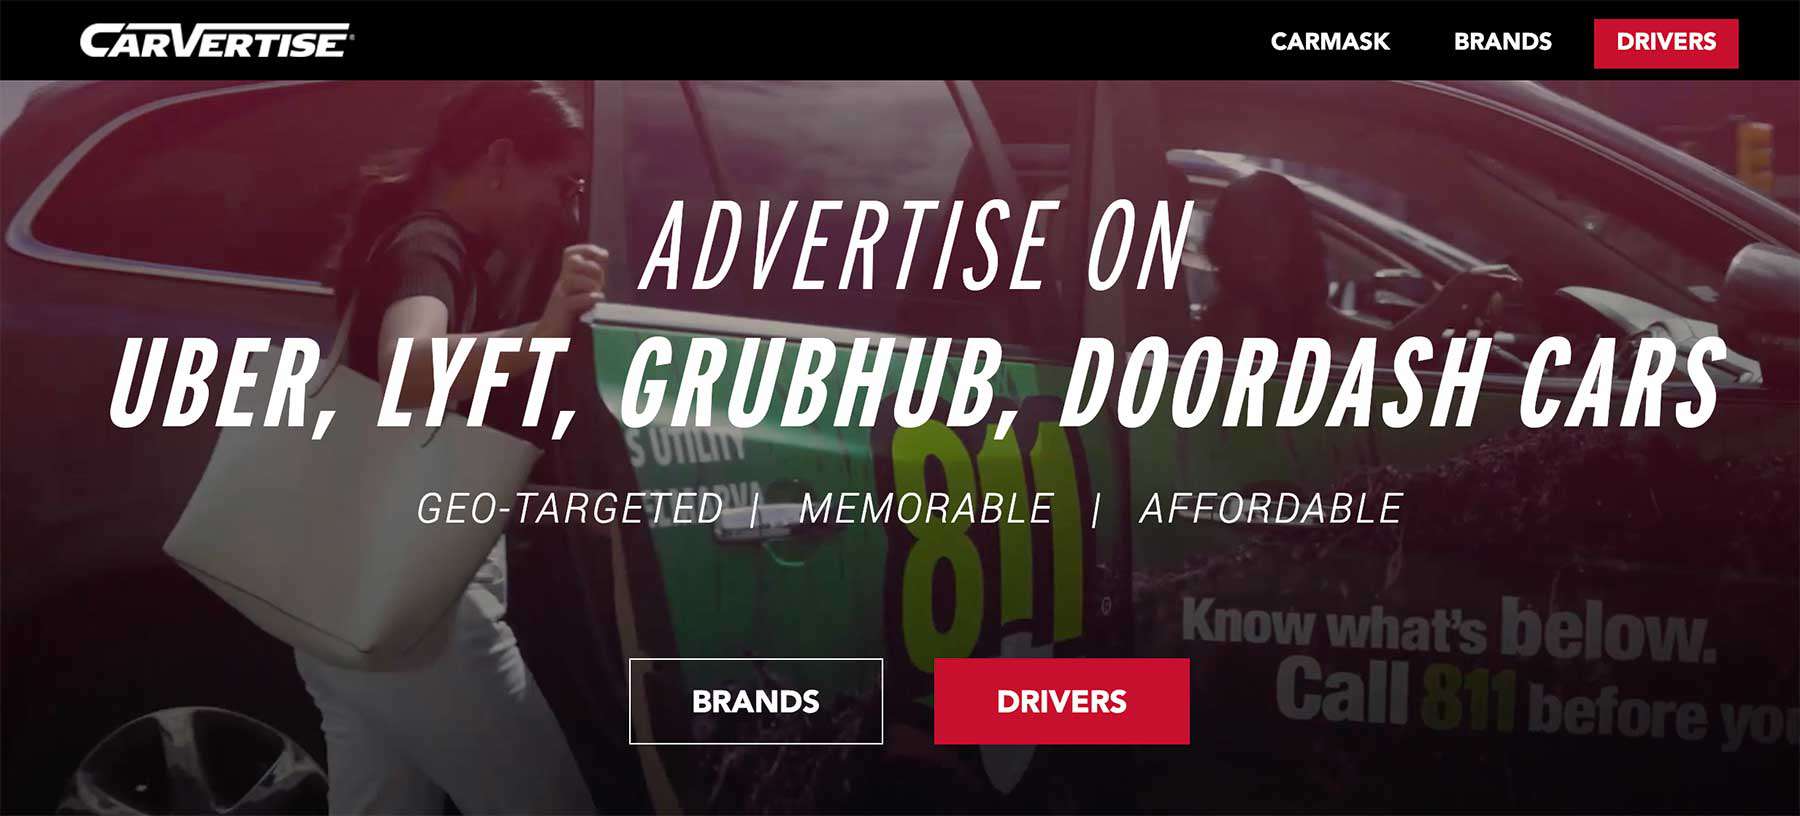 Get Paid to Advertise on Car